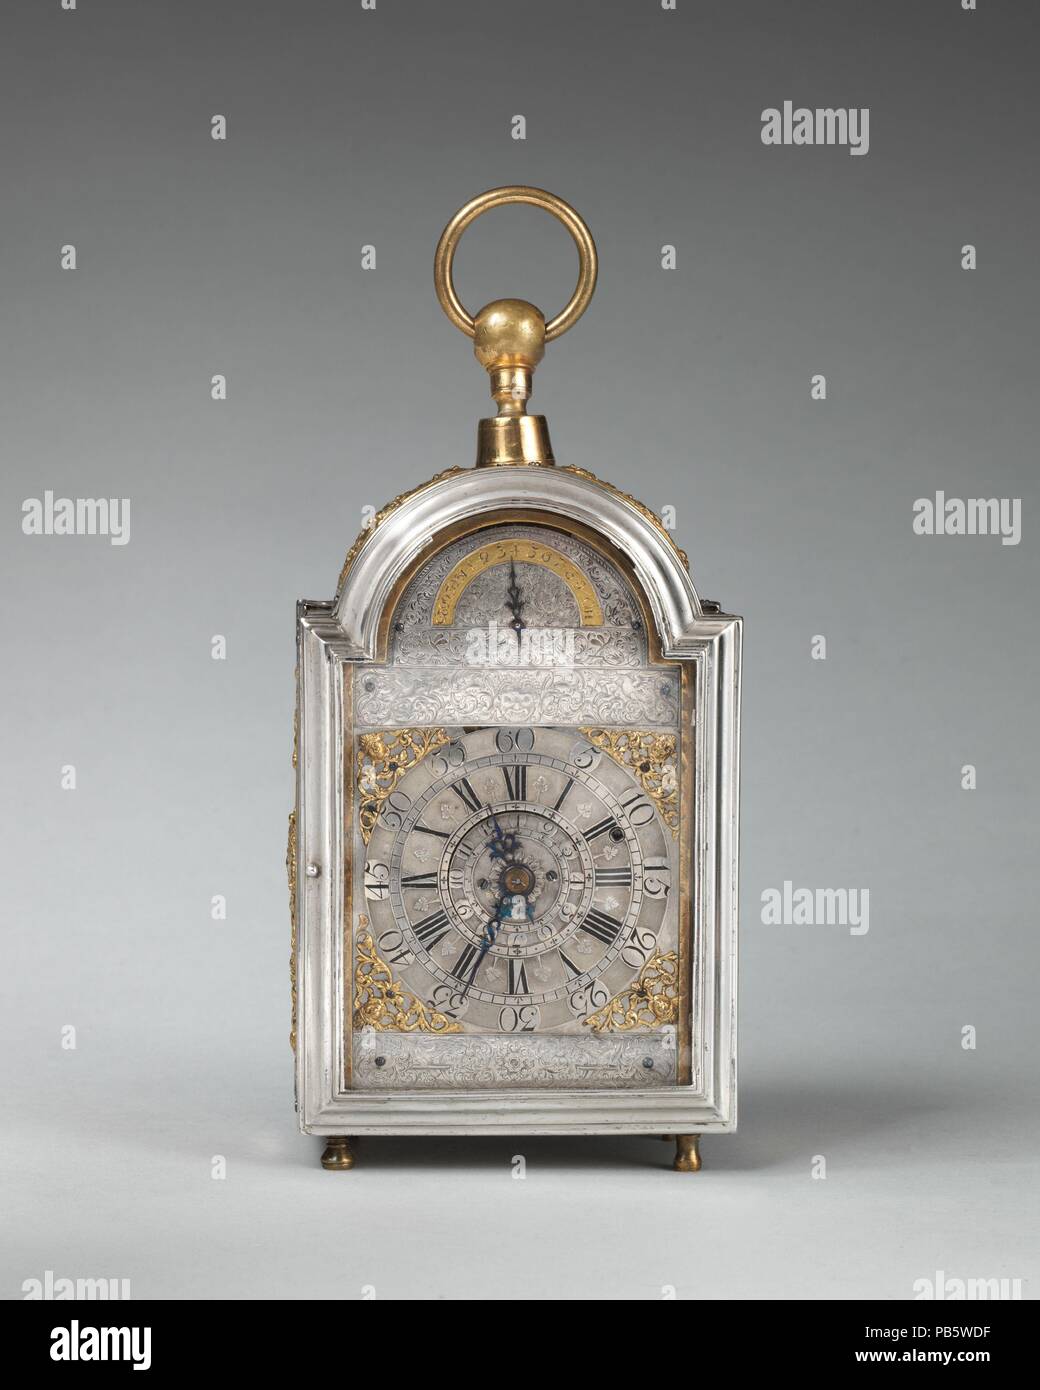 Traveling clock with alarm and calendar. Culture: British, London. Dimensions: Overall: 9 × 4 × 2 1/2 in. (22.9 × 10.2 × 6.4 cm). Maker: Probably by Joseph Paulet (recorded 1687-1716). Date: ca. 1700-1710.  In the late seventeenth and early eighteenth century small clocks adapted for traveling were comparatively rare. This example, in an exquisite case of engraved and repoussé silver, with a champlevé silver dial, belongs to a group of five or six examples, all signed 'Paulet London.' The universal ball joint at the top allows the clock to swing from its suspension ring, cushioning the jolts o Stock Photo